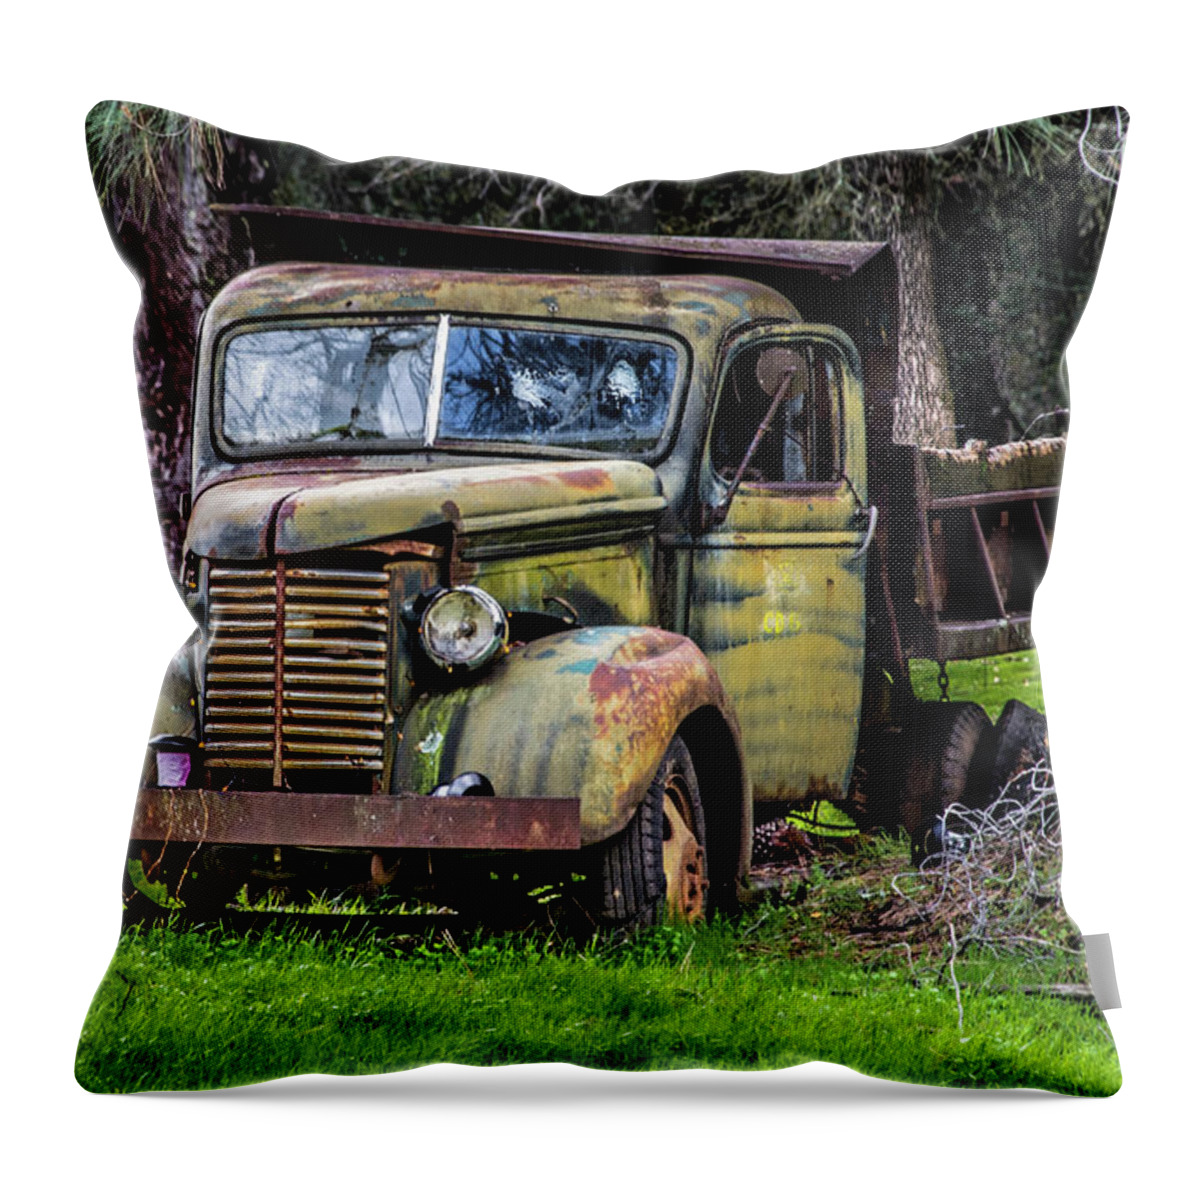 Old Truck Throw Pillow featuring the photograph French Creek Truck by Steph Gabler